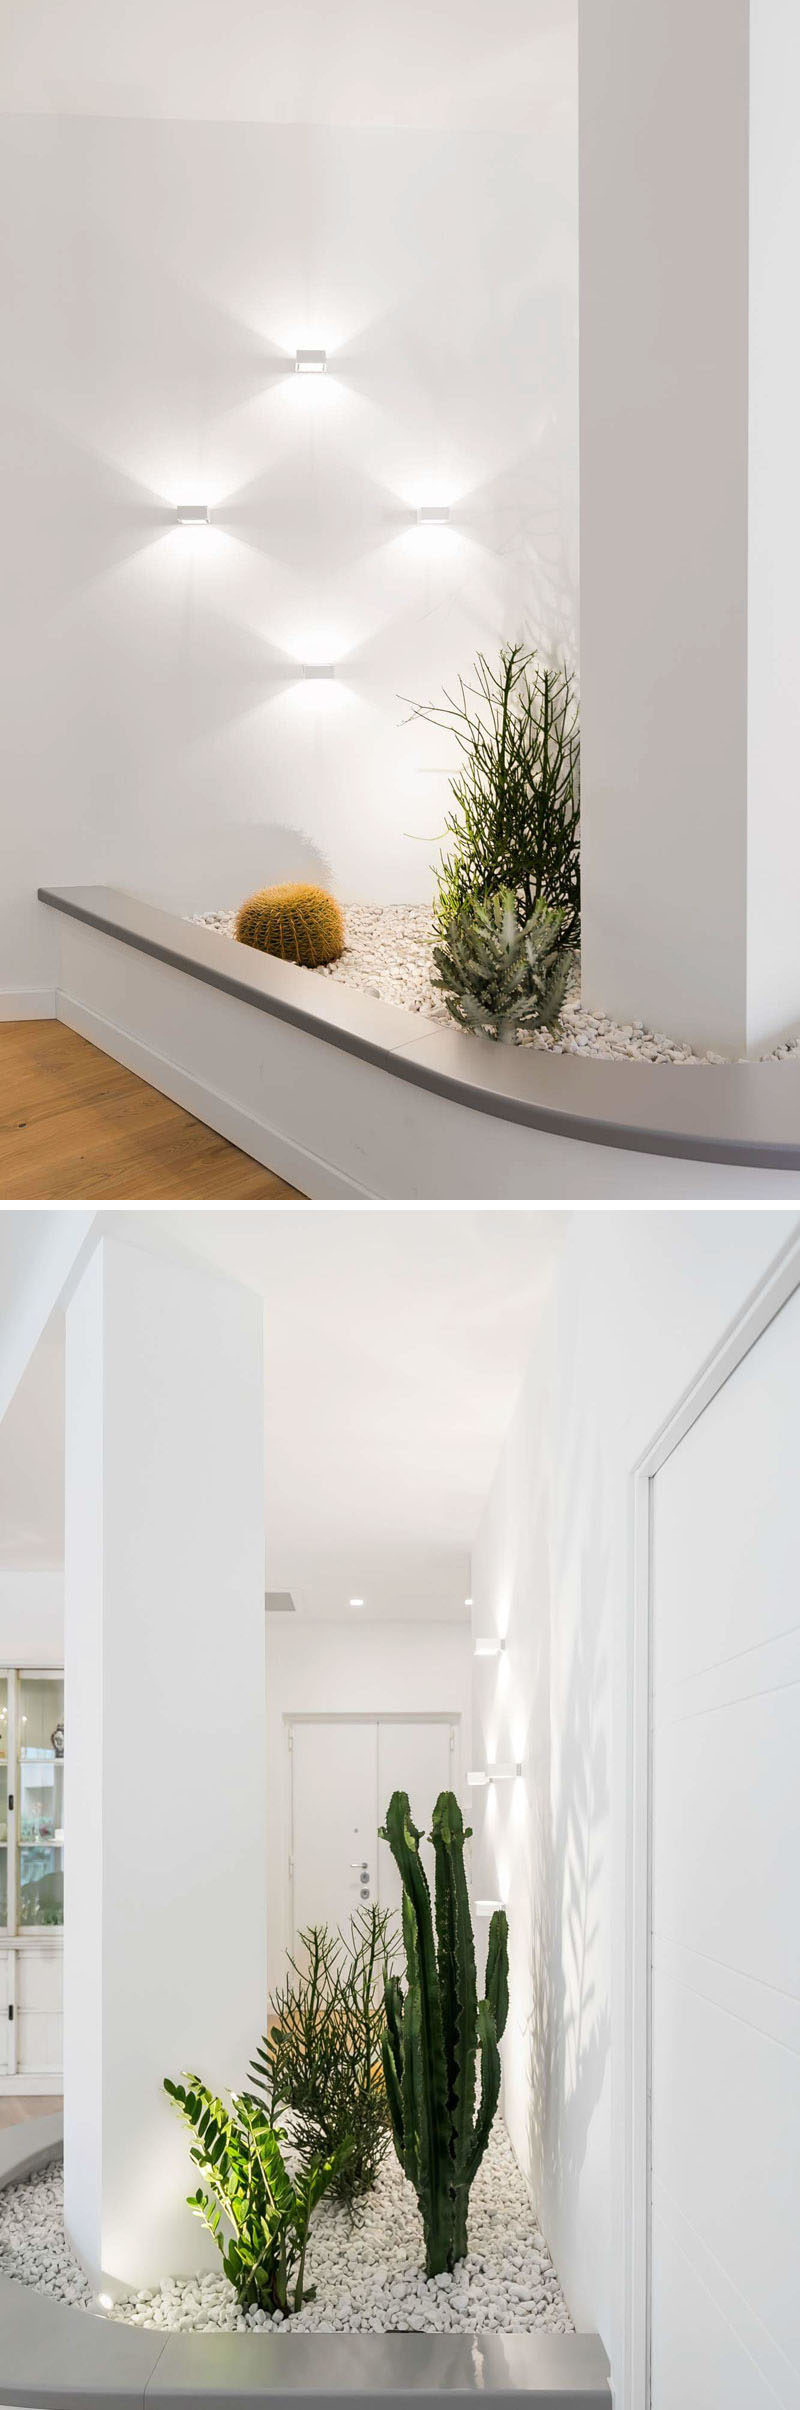 To work with an awkward column, the designers of this interior built a planter with a bench that incorporates the column, and draws the eye to the lighting and plants, helping the column to 'disappear' and blend into its surroundings. #Column #InteriorDesign #Planter #BuiltInPlanter